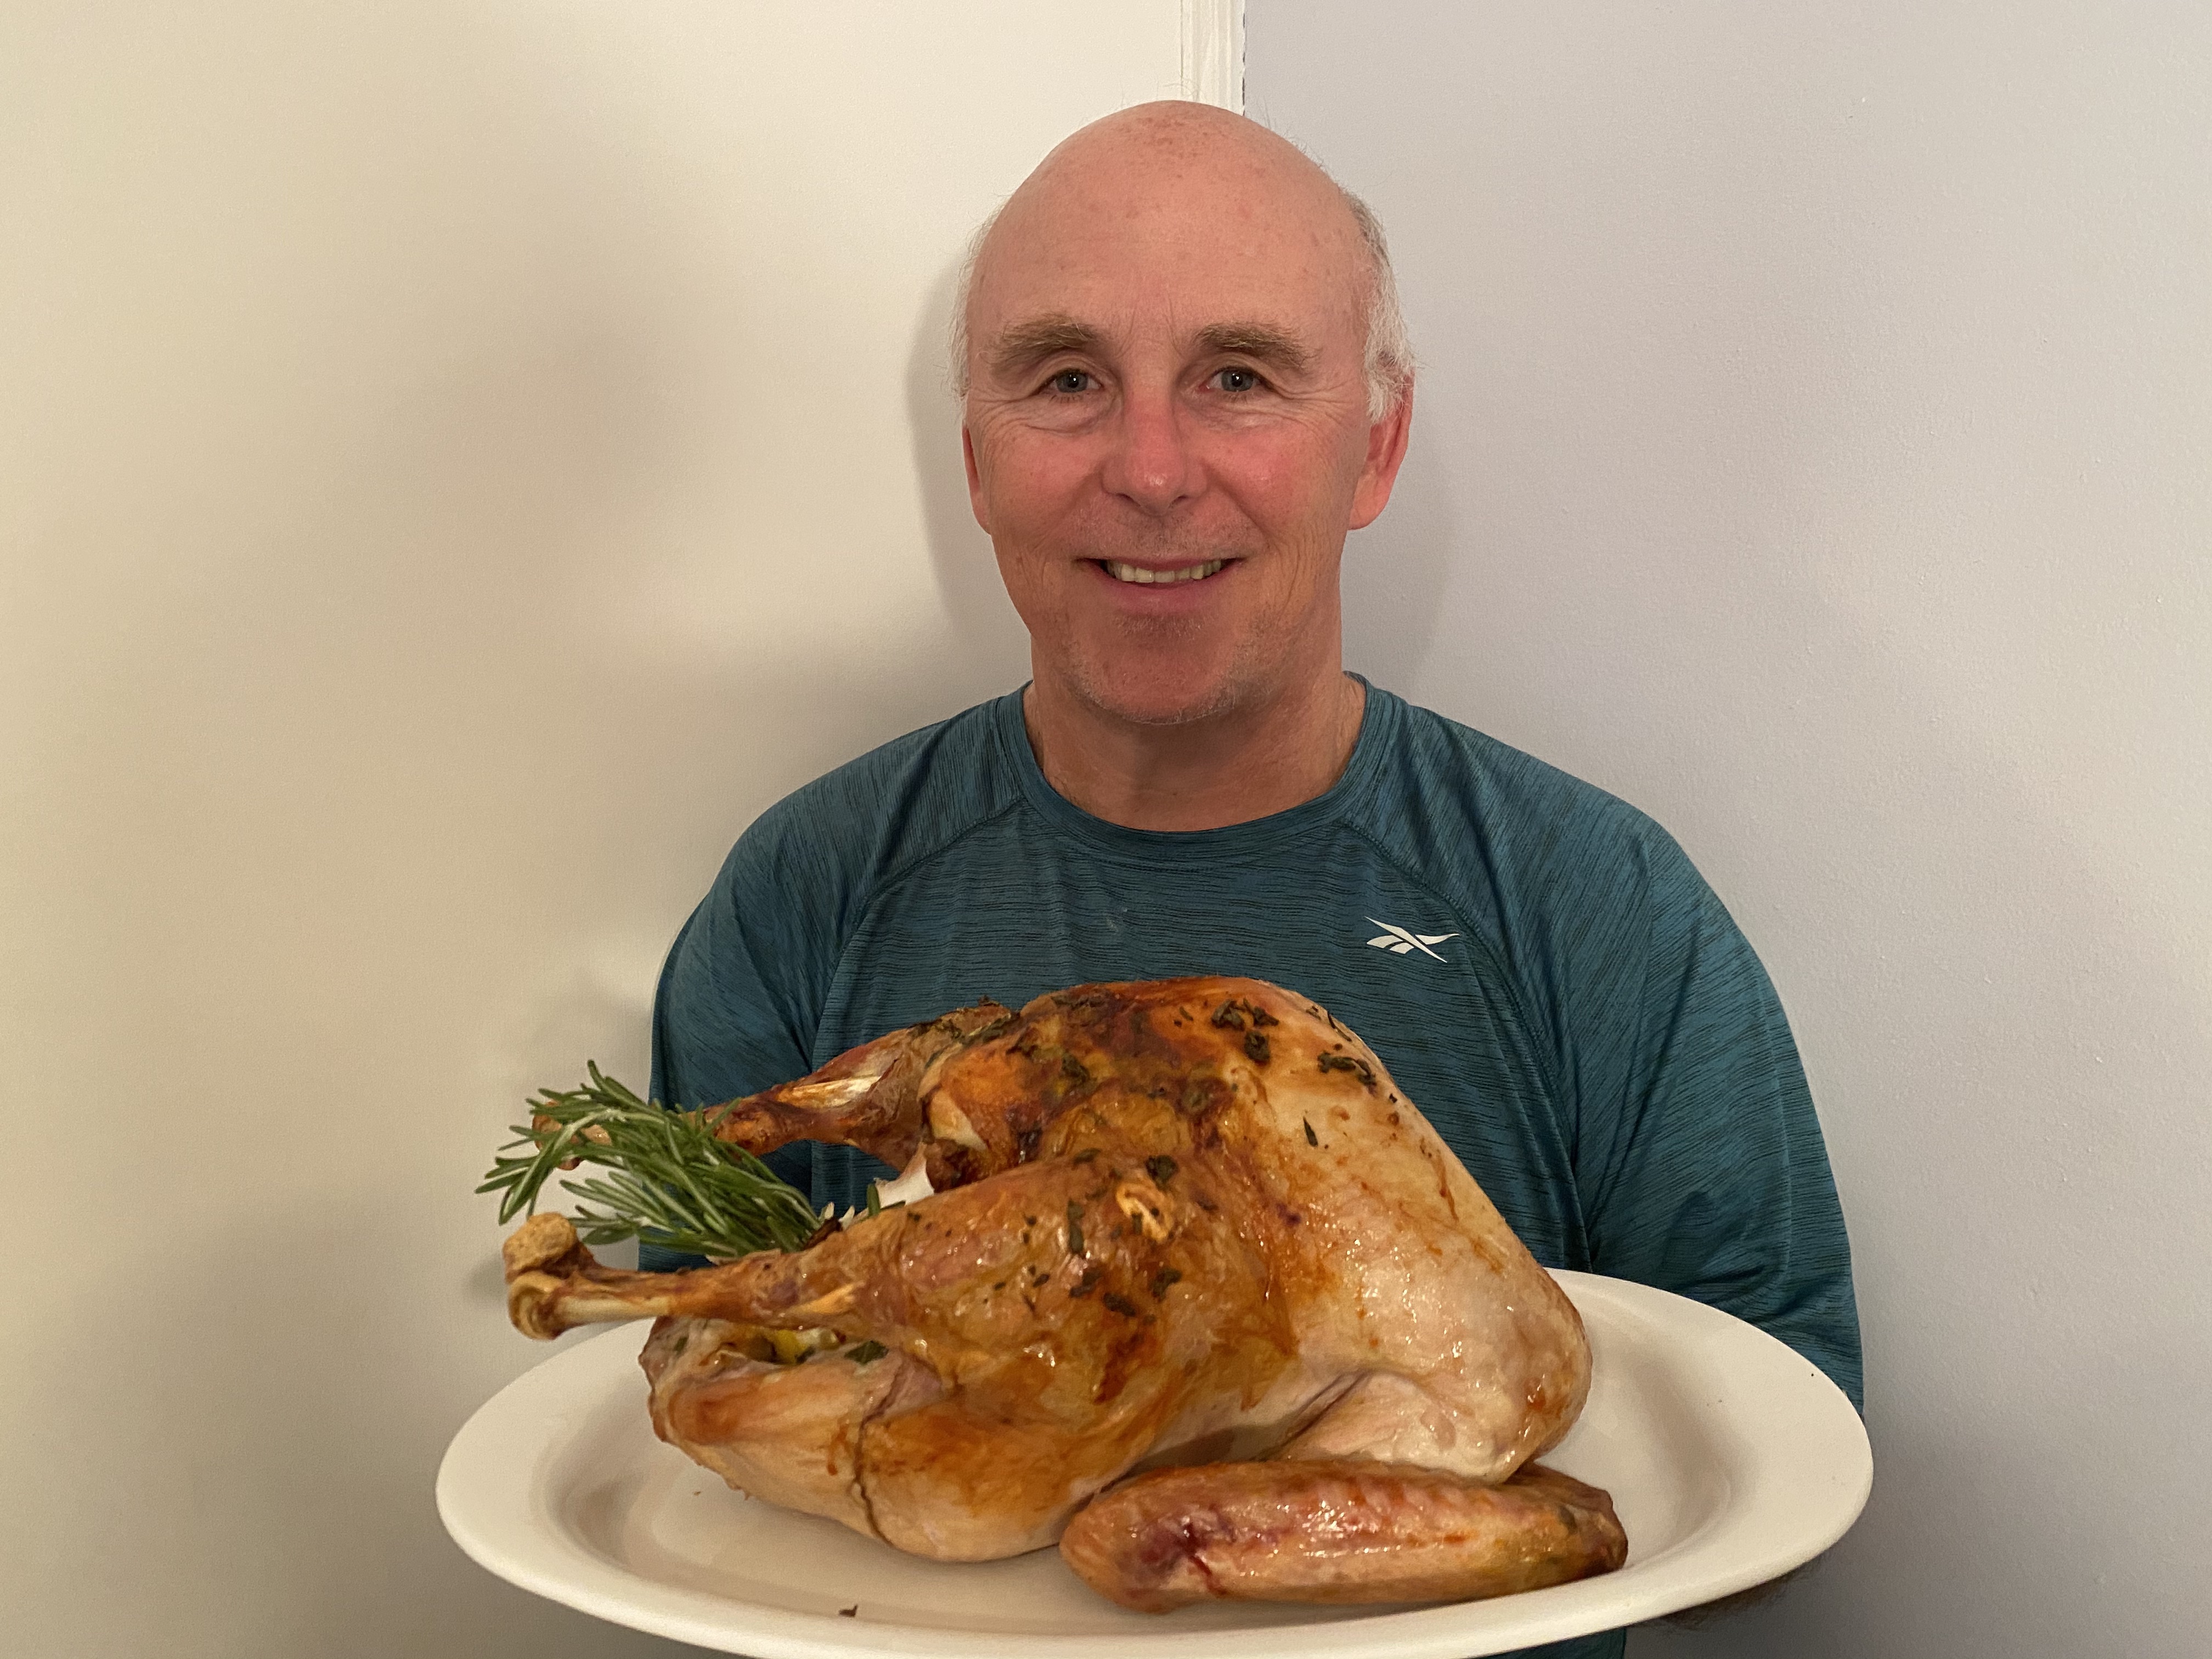 Photo of Chef Rob holding a platter with a roast turkey.